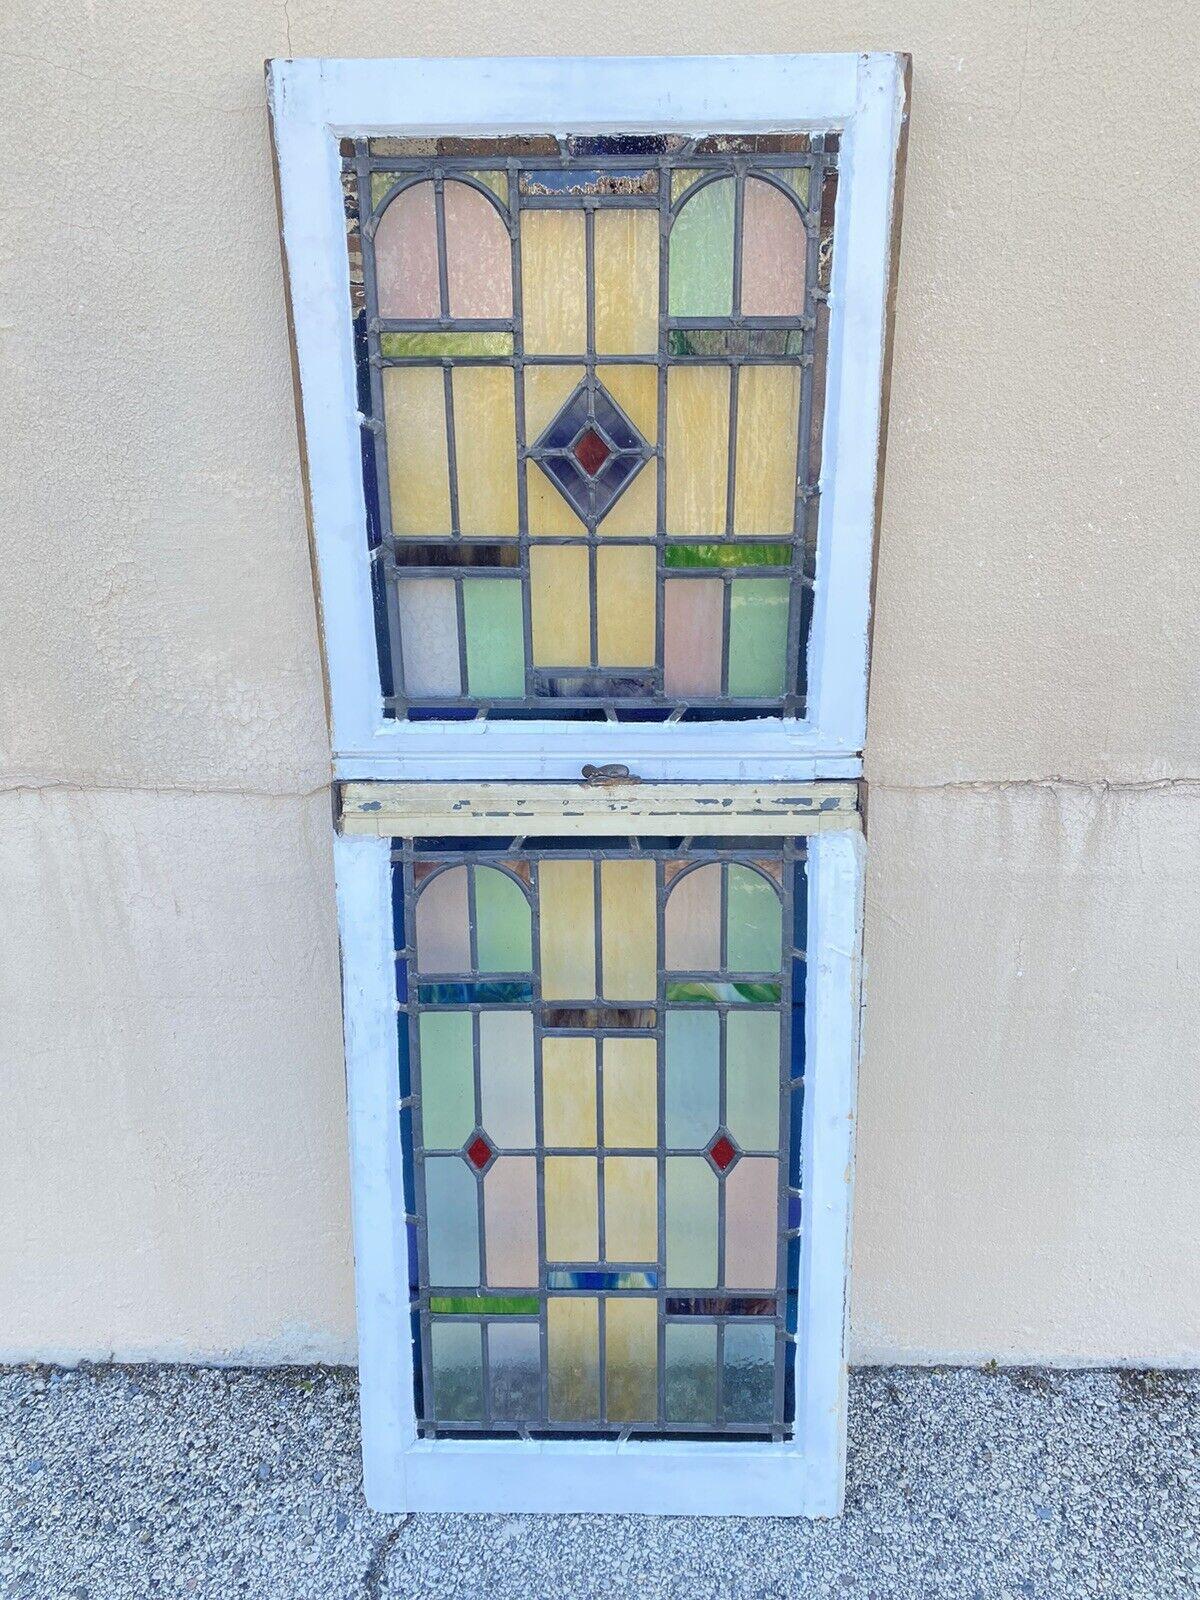 Antique Art Deco Leaded Stained Glass Pink Green Blue Yellow Windows - (2) Pair. Item features wonderful pink, green, blue, and yellow Art Deco stained glass, white painted exterior wooden frames, brown wooden interior frames. Listing includes (2)